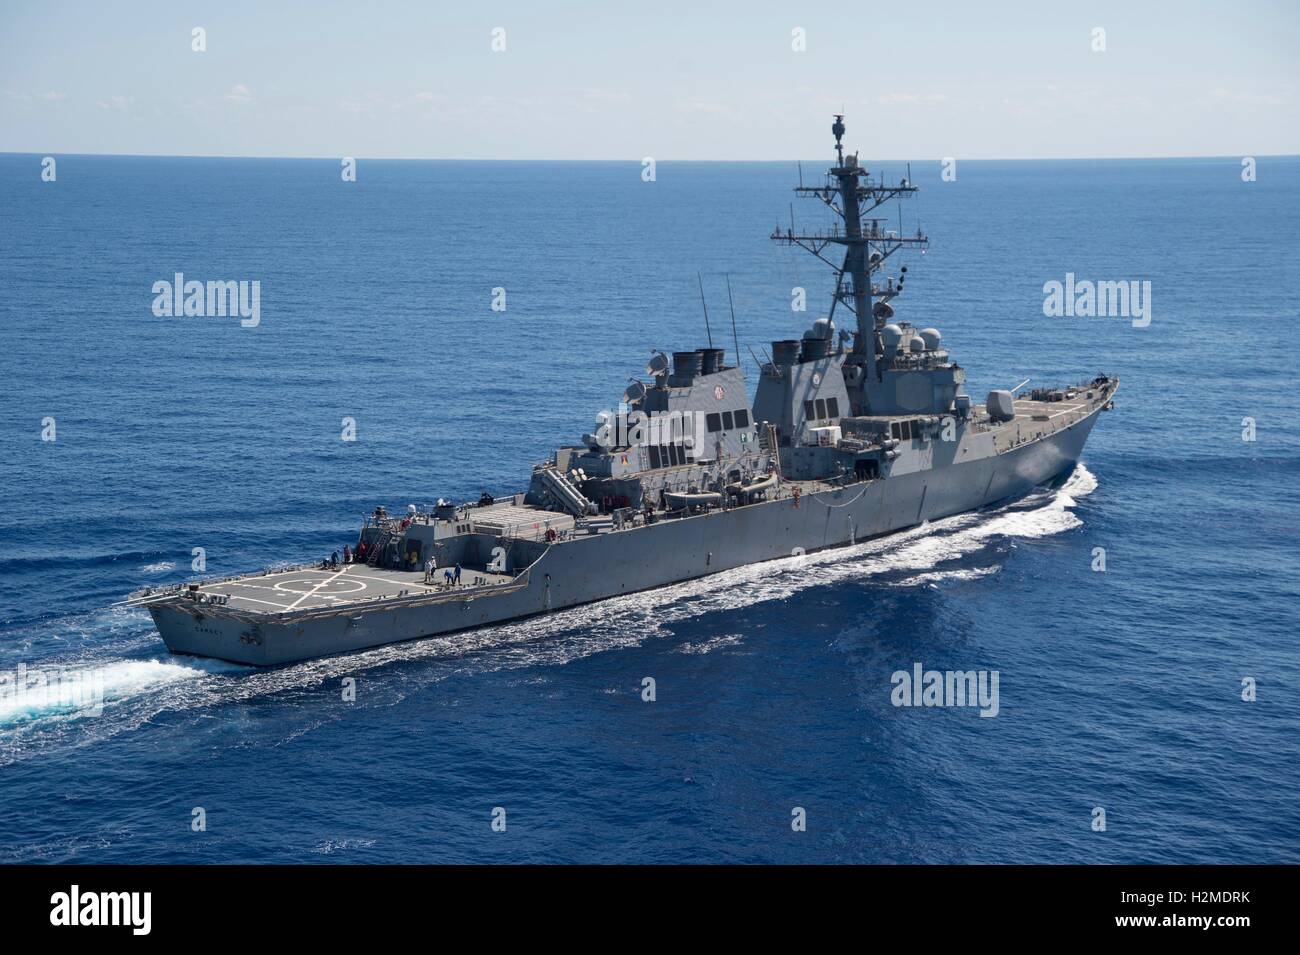 The USN Arleigh Burke-class guided-missile destroyer USS Carney steams underway while on a routine patrol during deployment September 23, 2016 in the Mediterranean Sea. Stock Photo